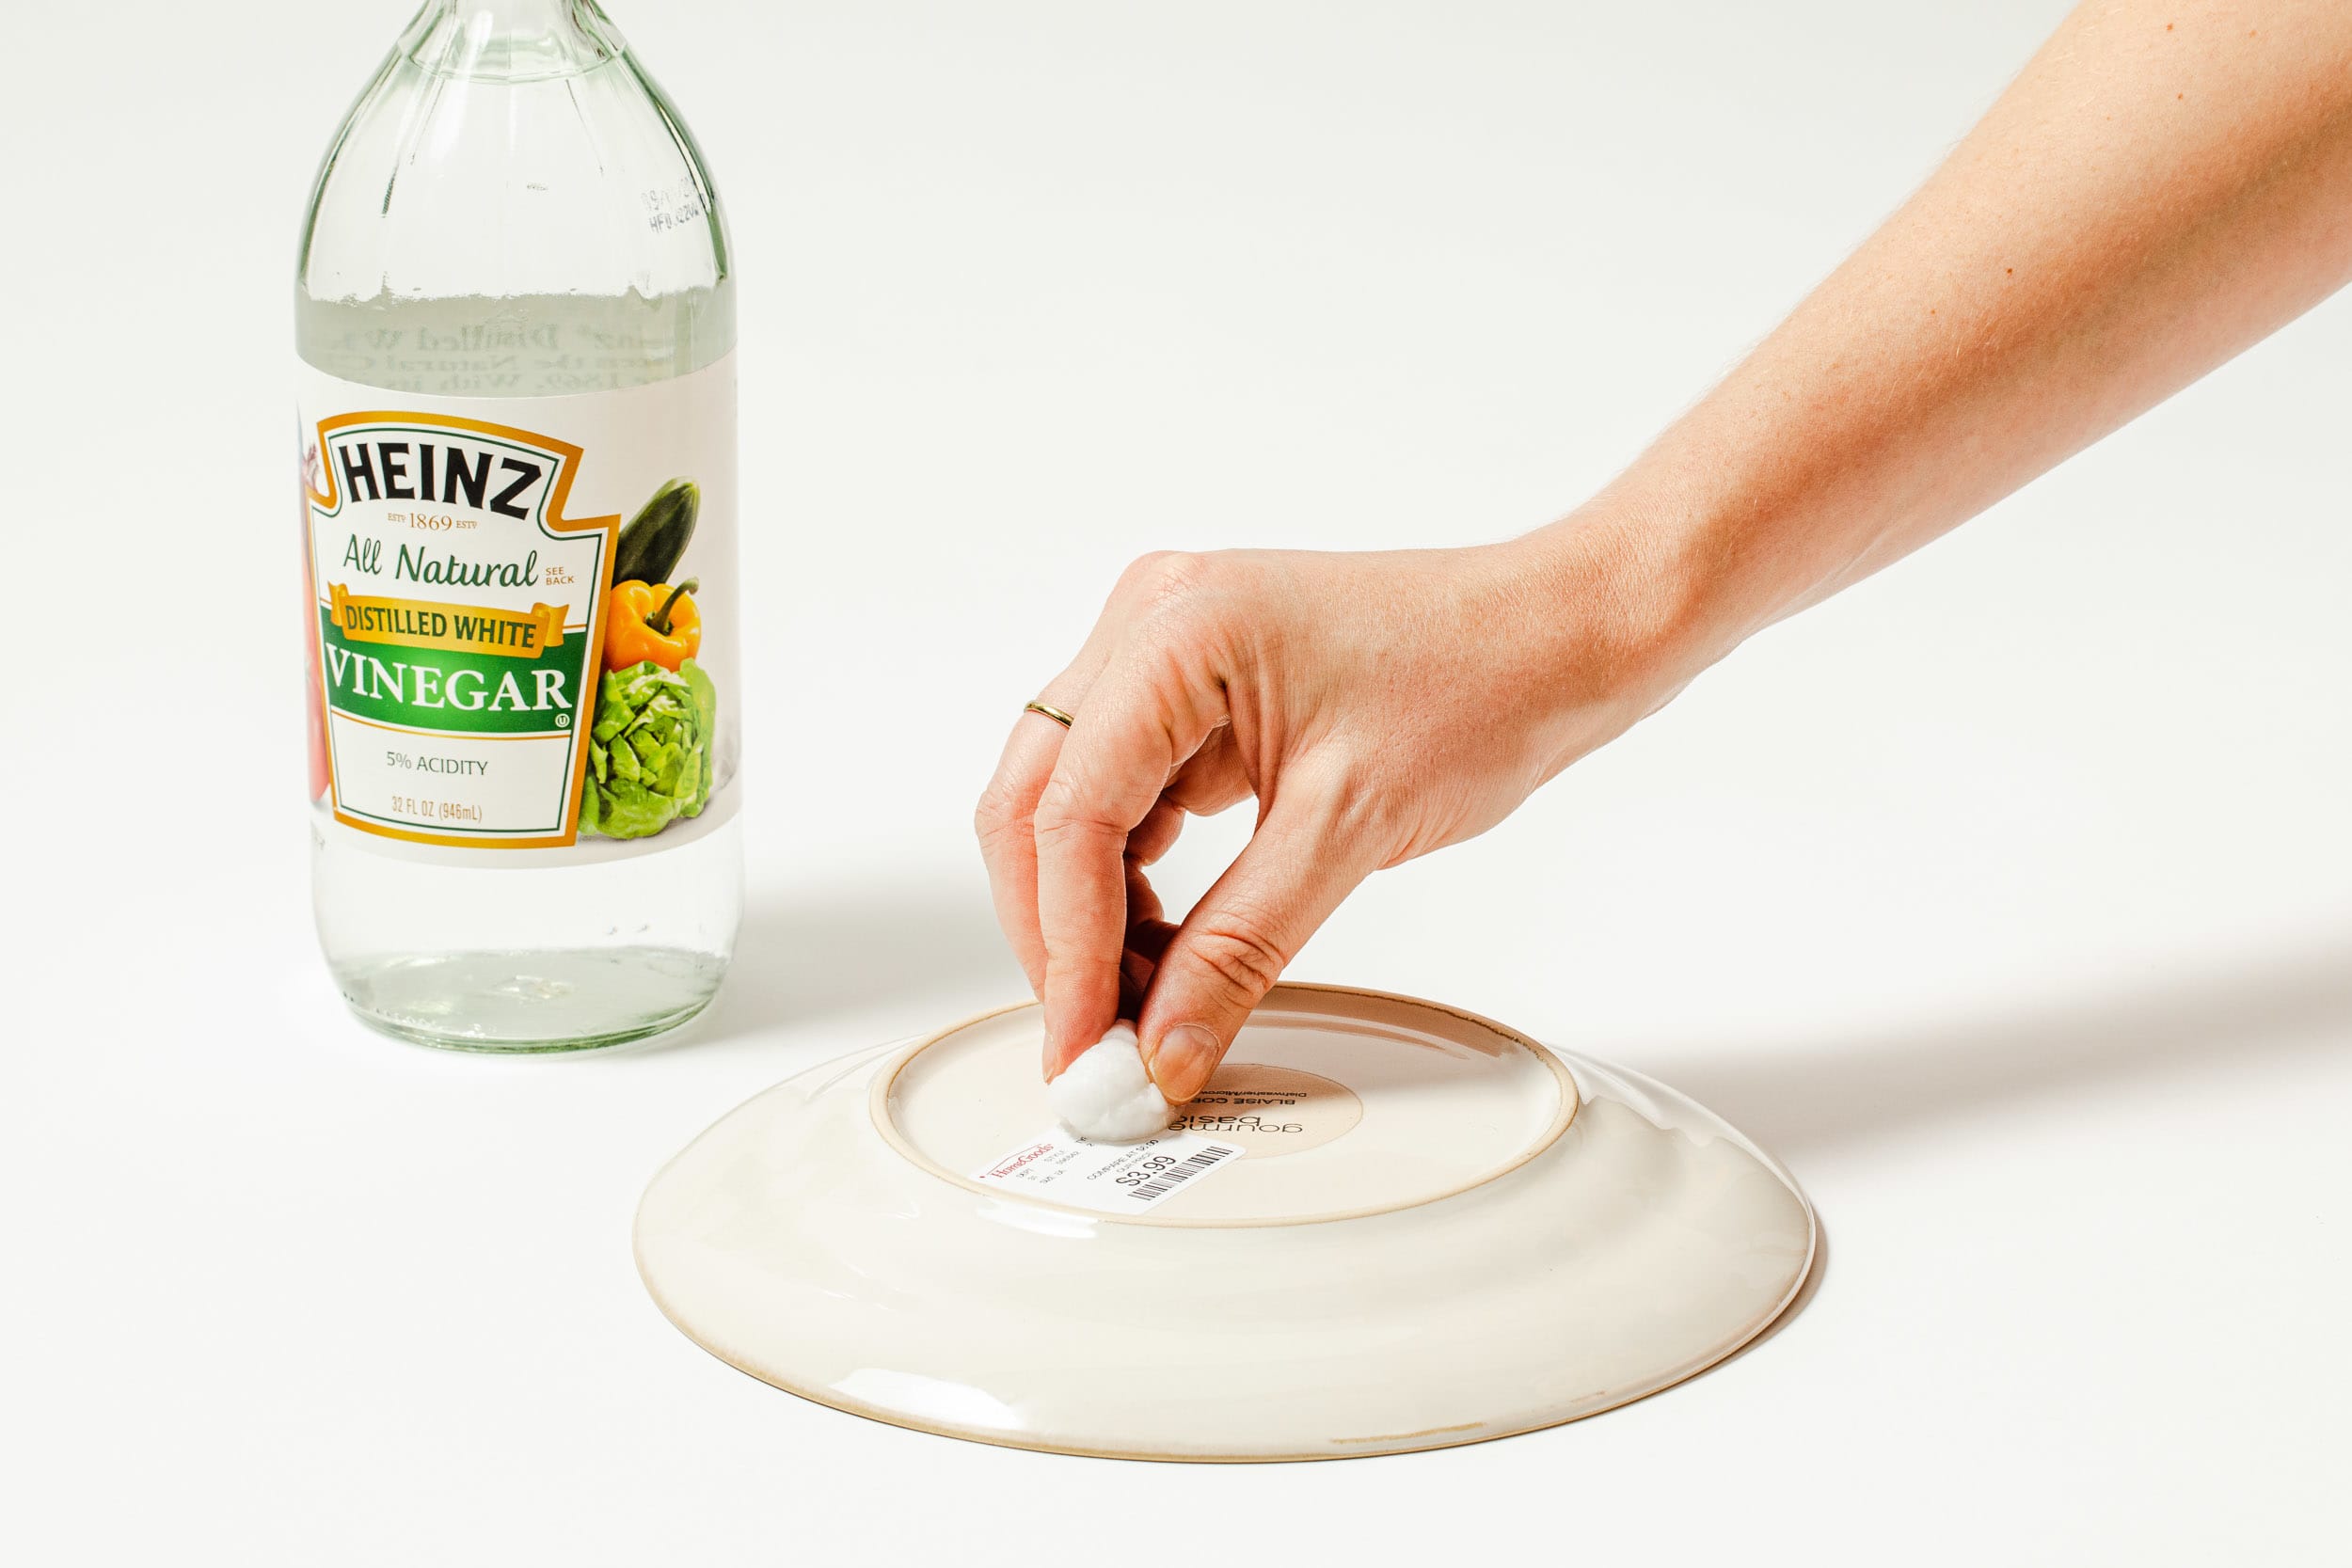 How to remove adhesives: The best ways to get rid of residue